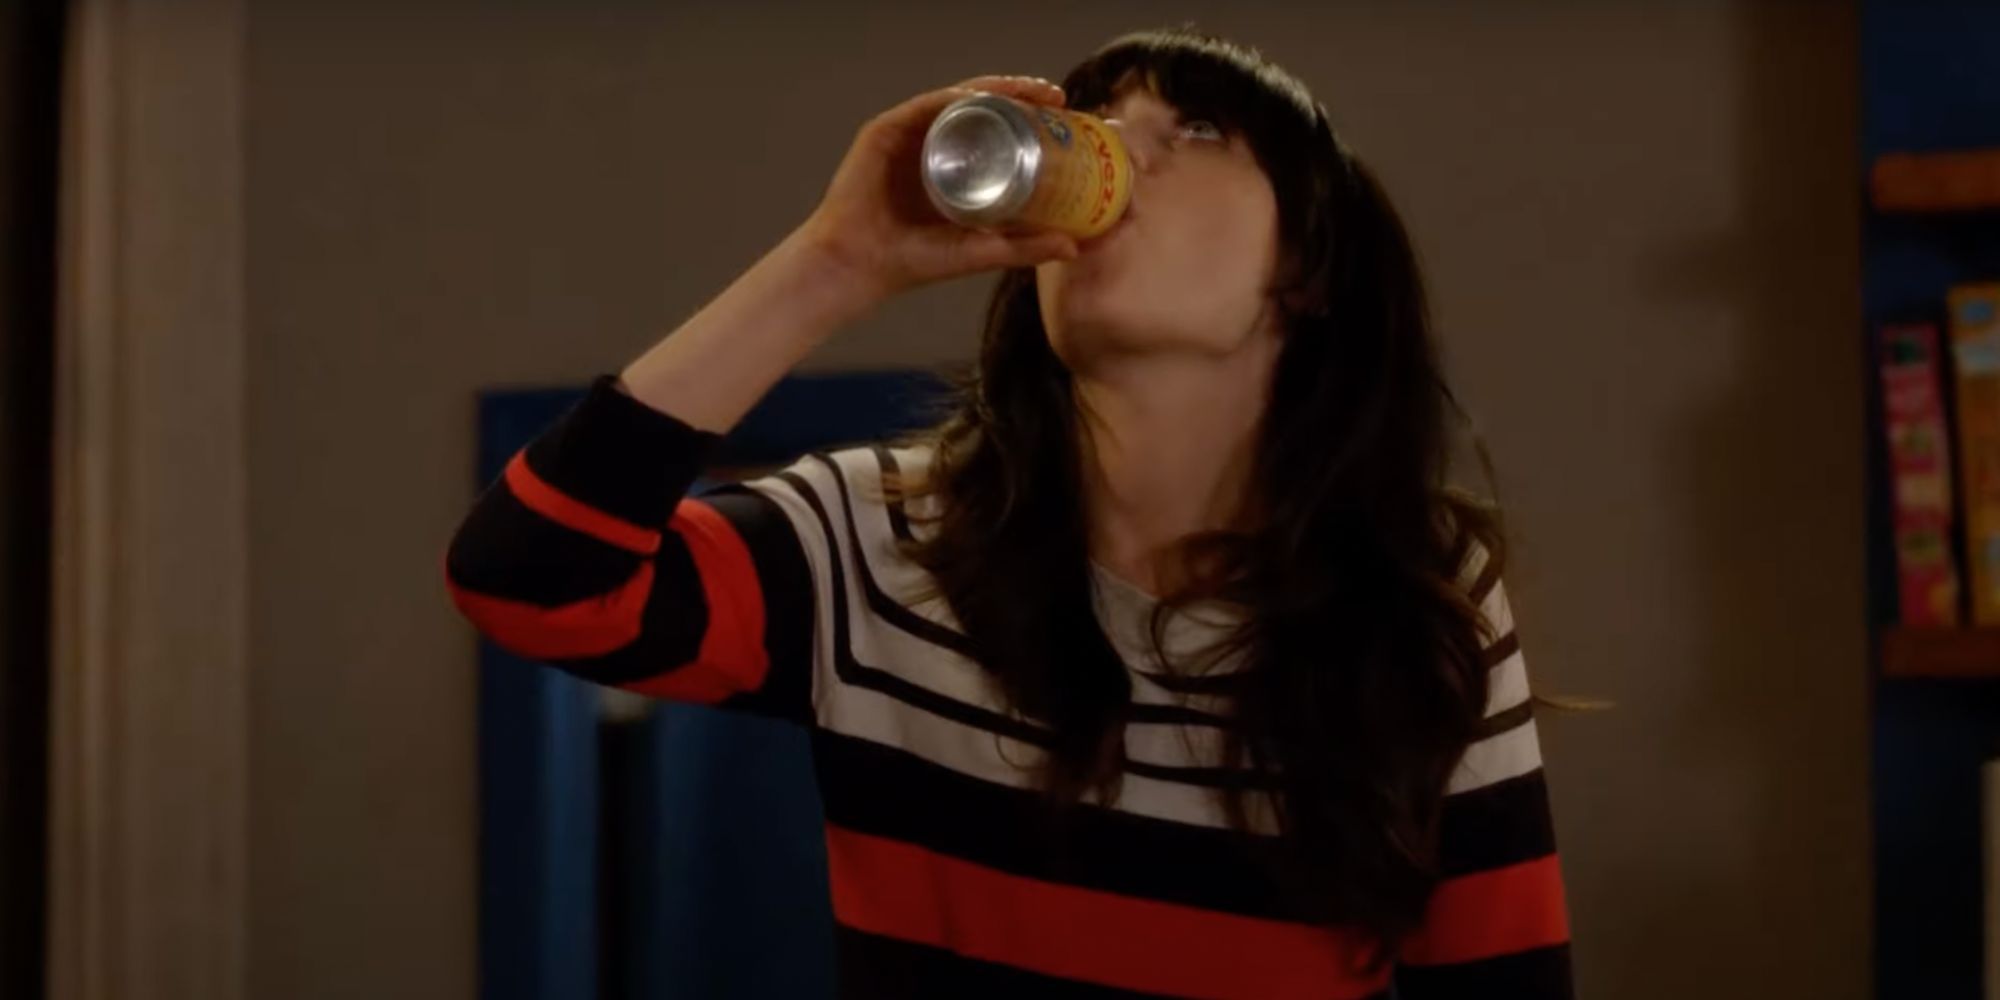 Jess drinks while playing true american in new girl